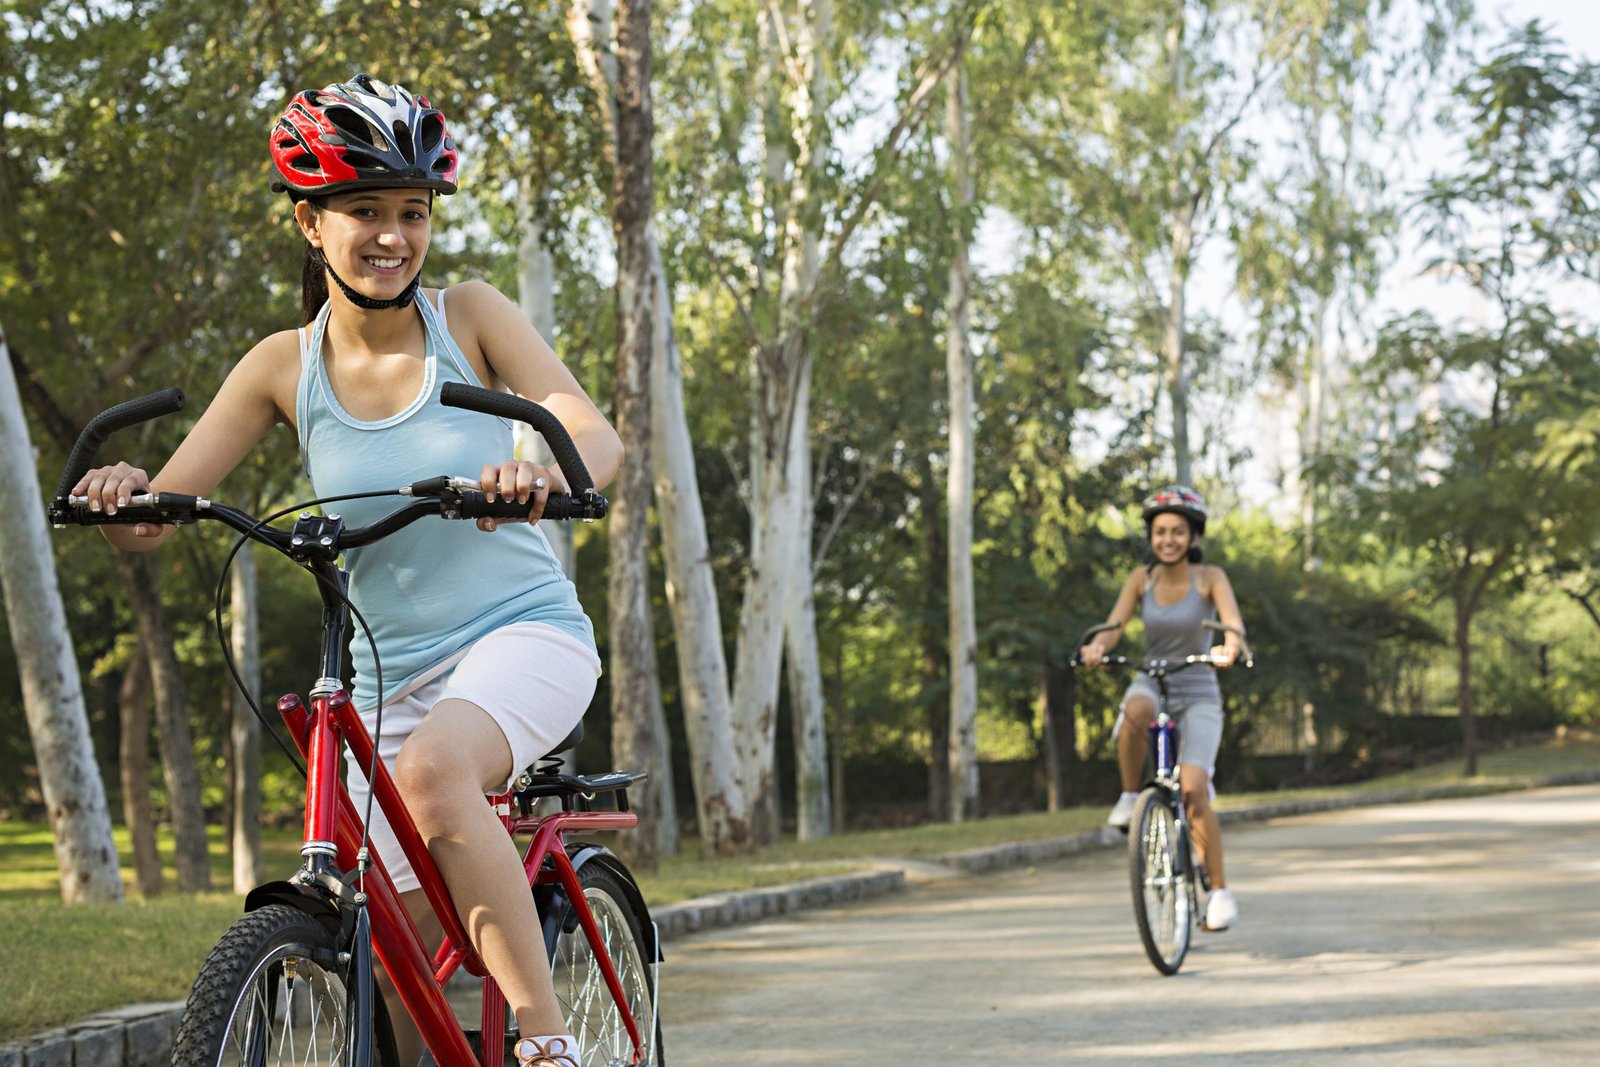 Cycling - The Best Remedy For Dialysis Patients